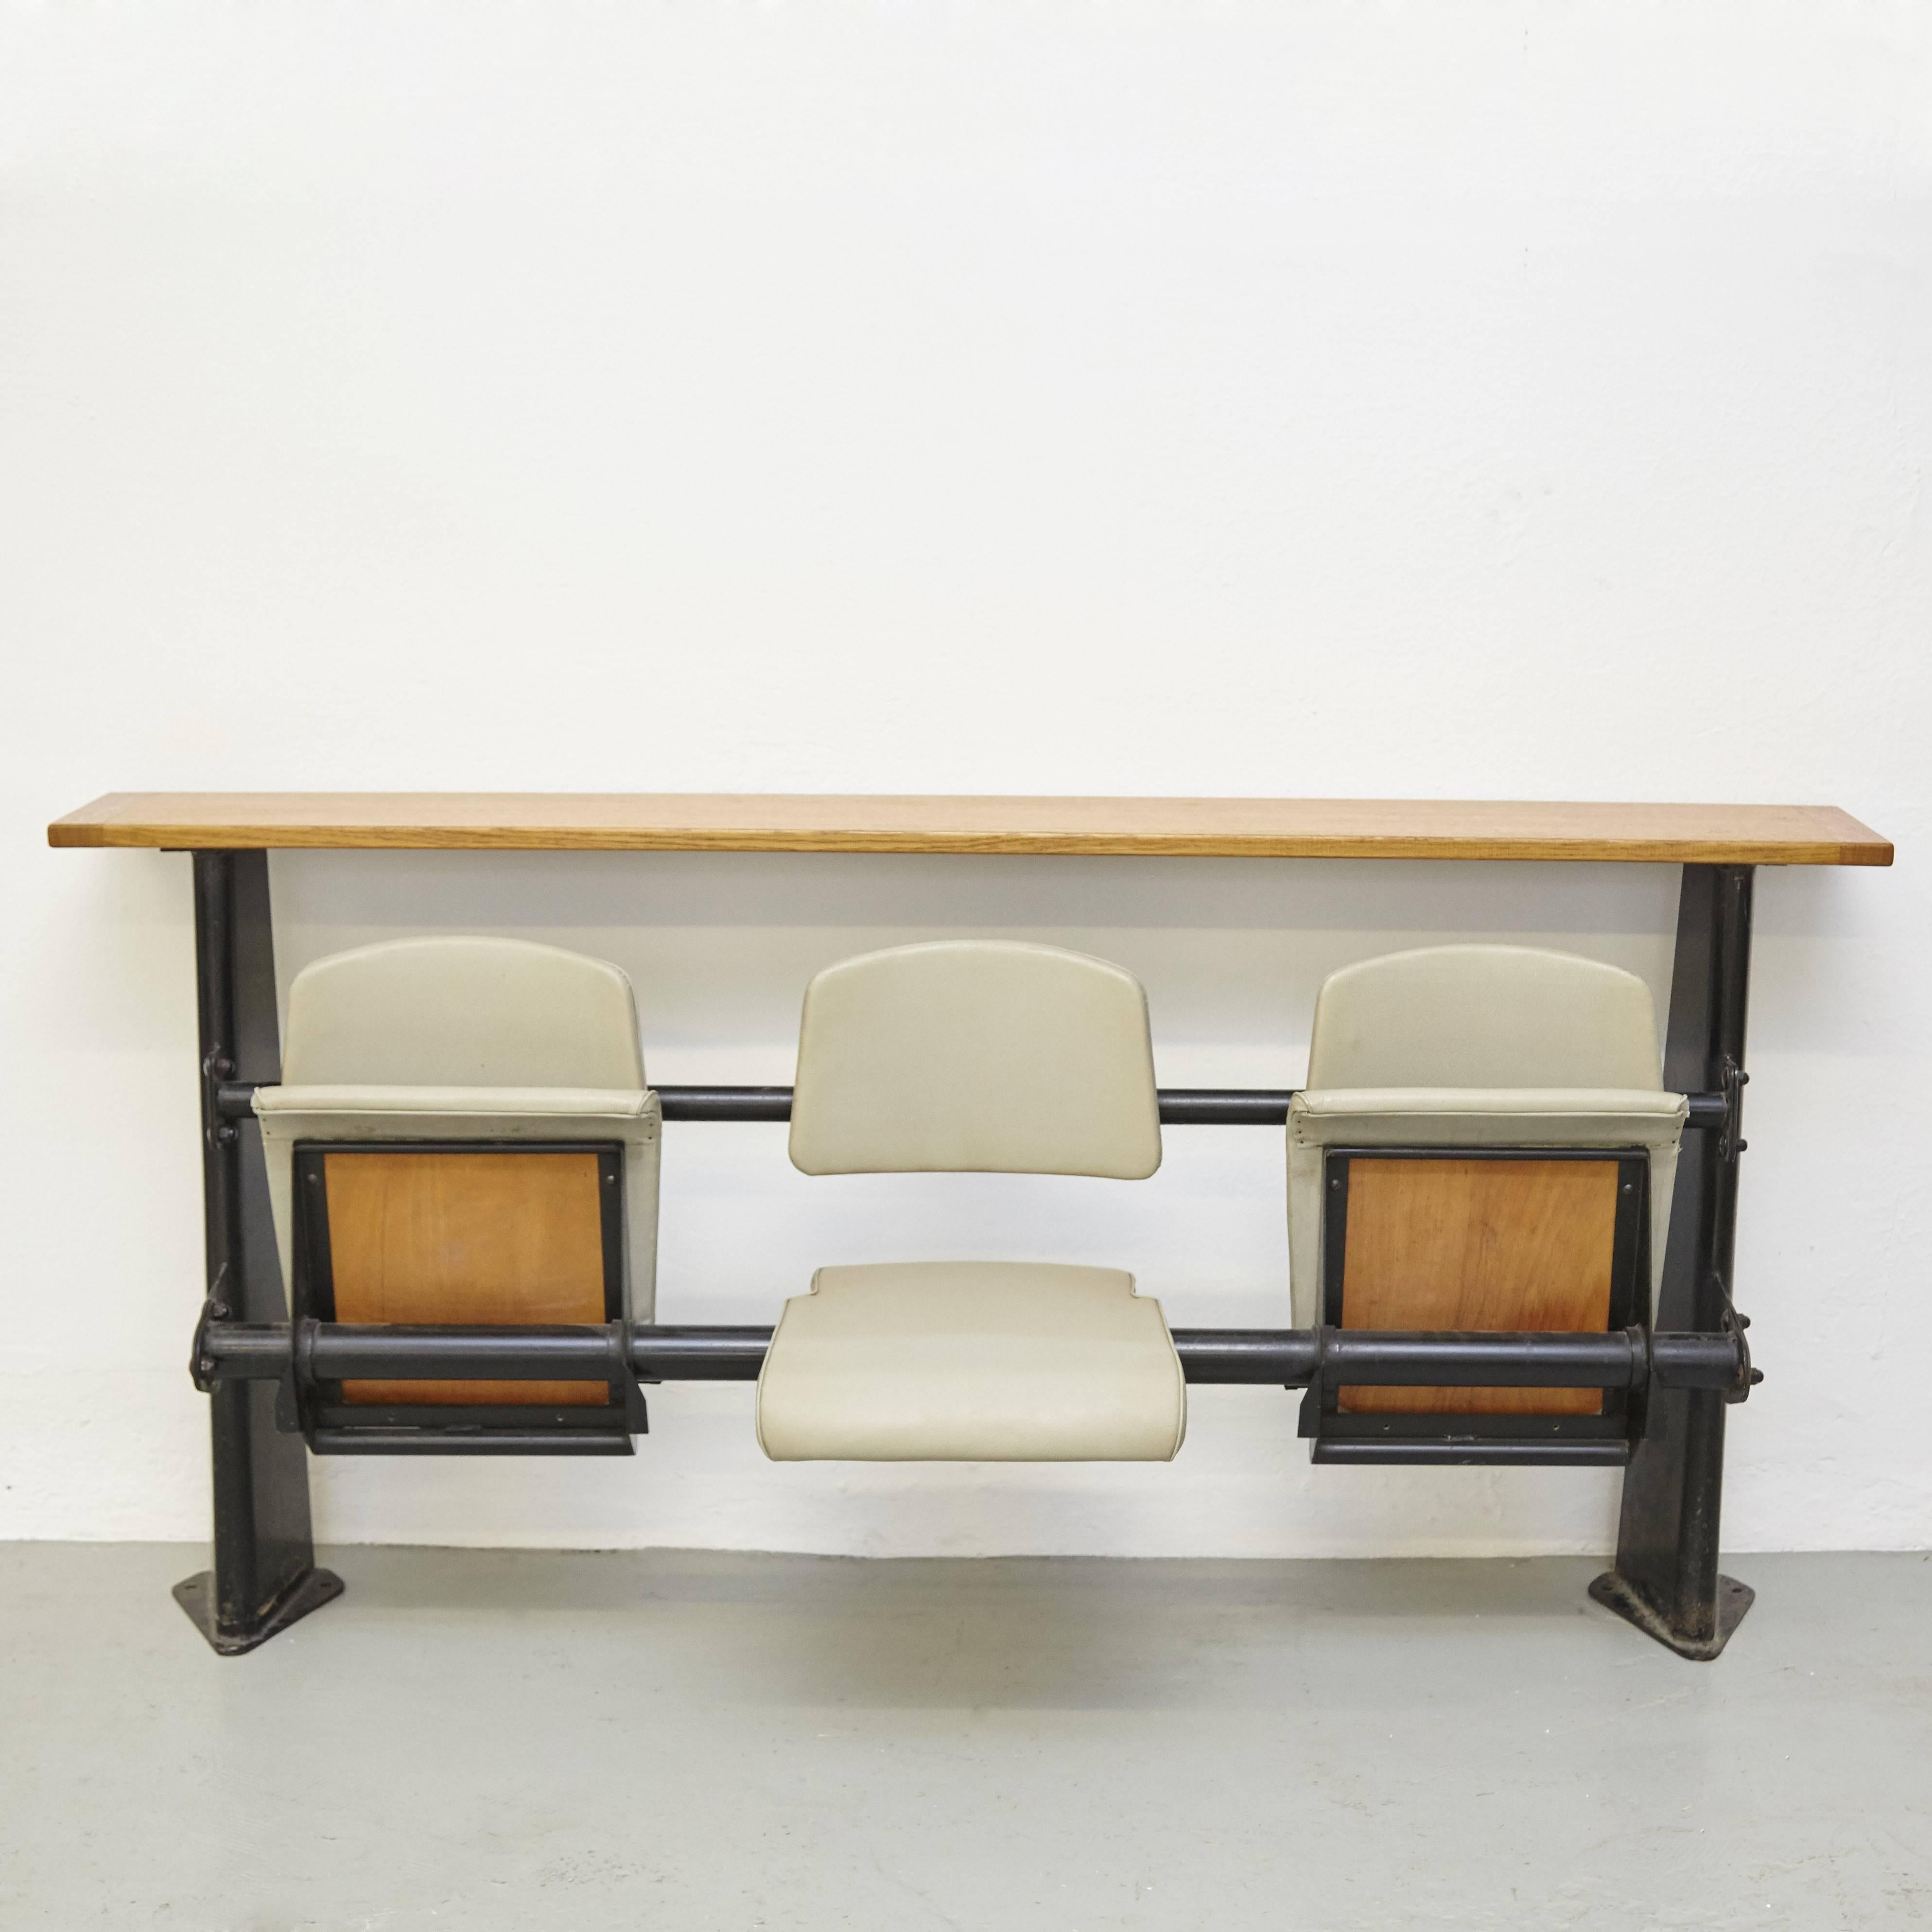 Bench designed by Jean Prouve, circa 1950.

Black lacquered steel sheet structure supports three standard seats with light grey faux leather upholstery.

In good original condition, with minor wear consistent with age and use, preserving a